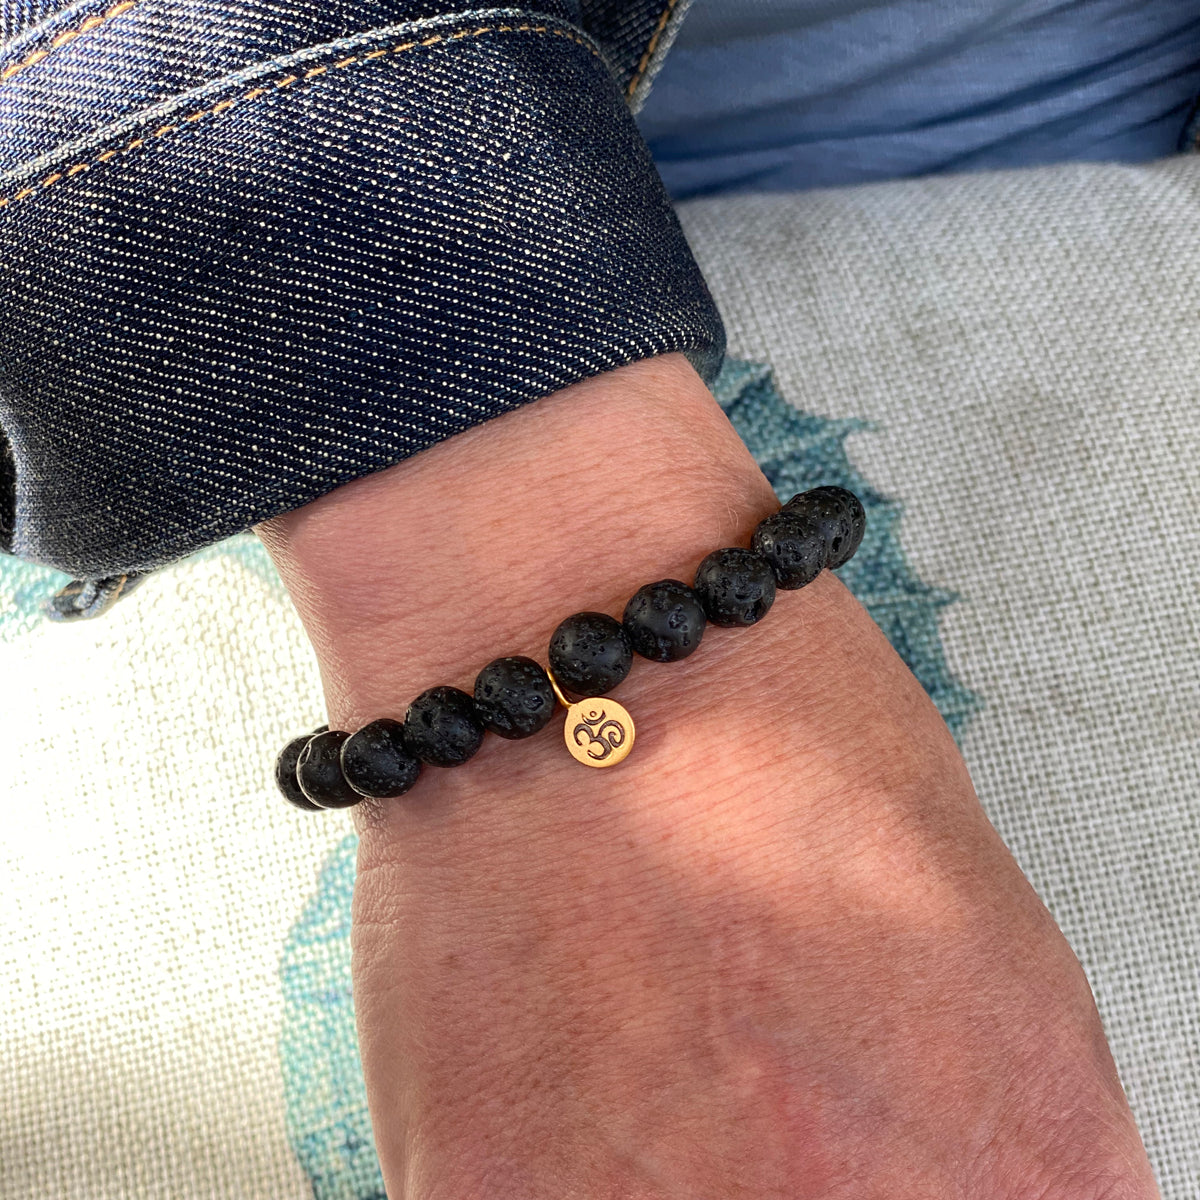 Yoga Inspired Lava Stone Bracelet with Ohm Charm to Hear the Sound of the Universe